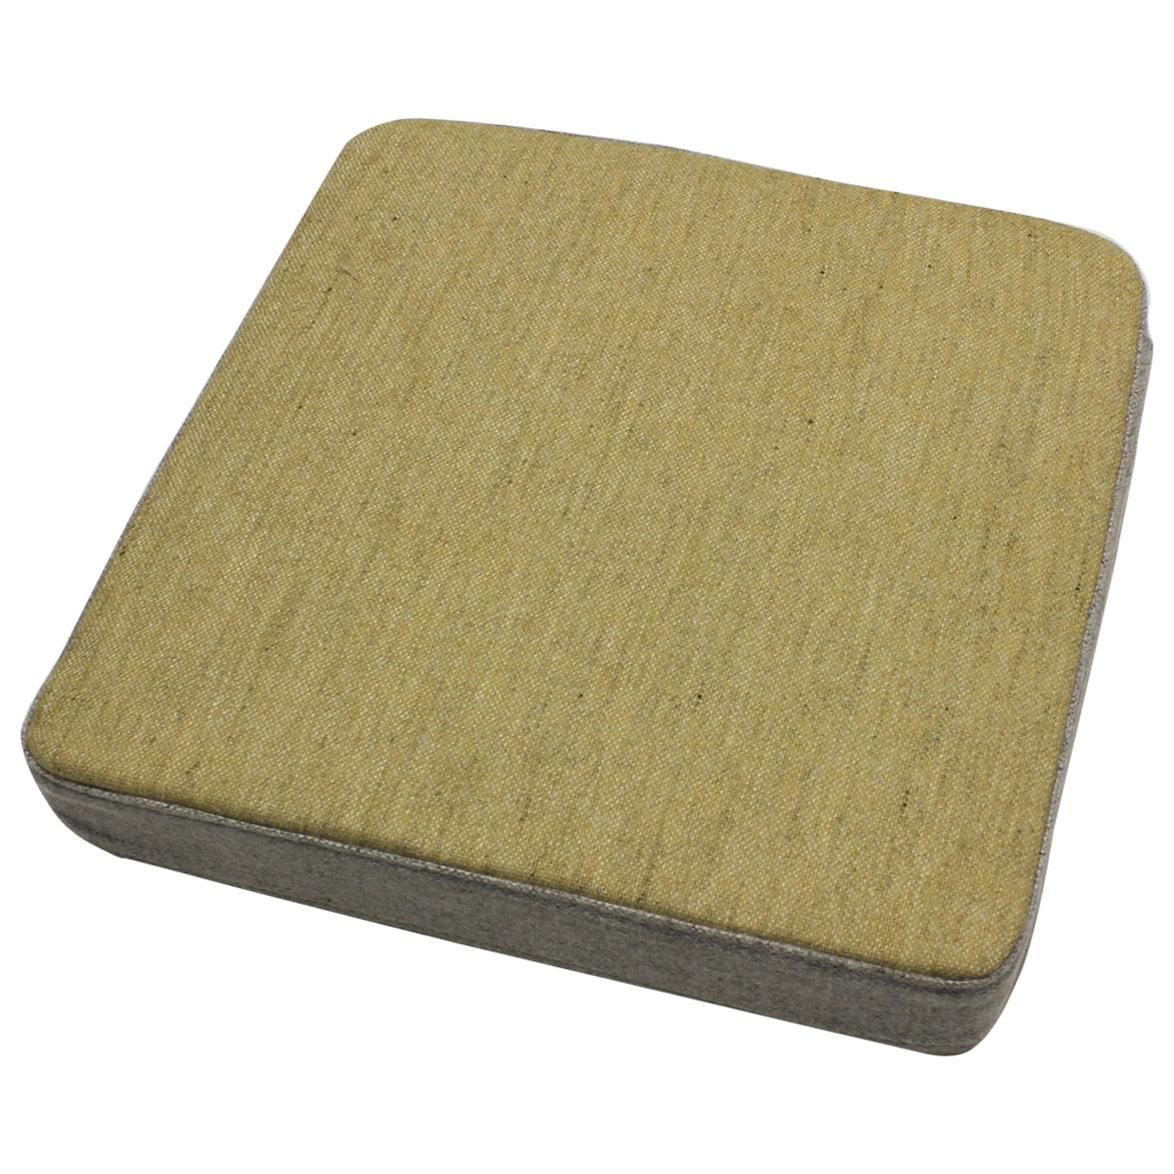 OPE, Ope Select, Cushion / Sound Absorber, Tan For Sale